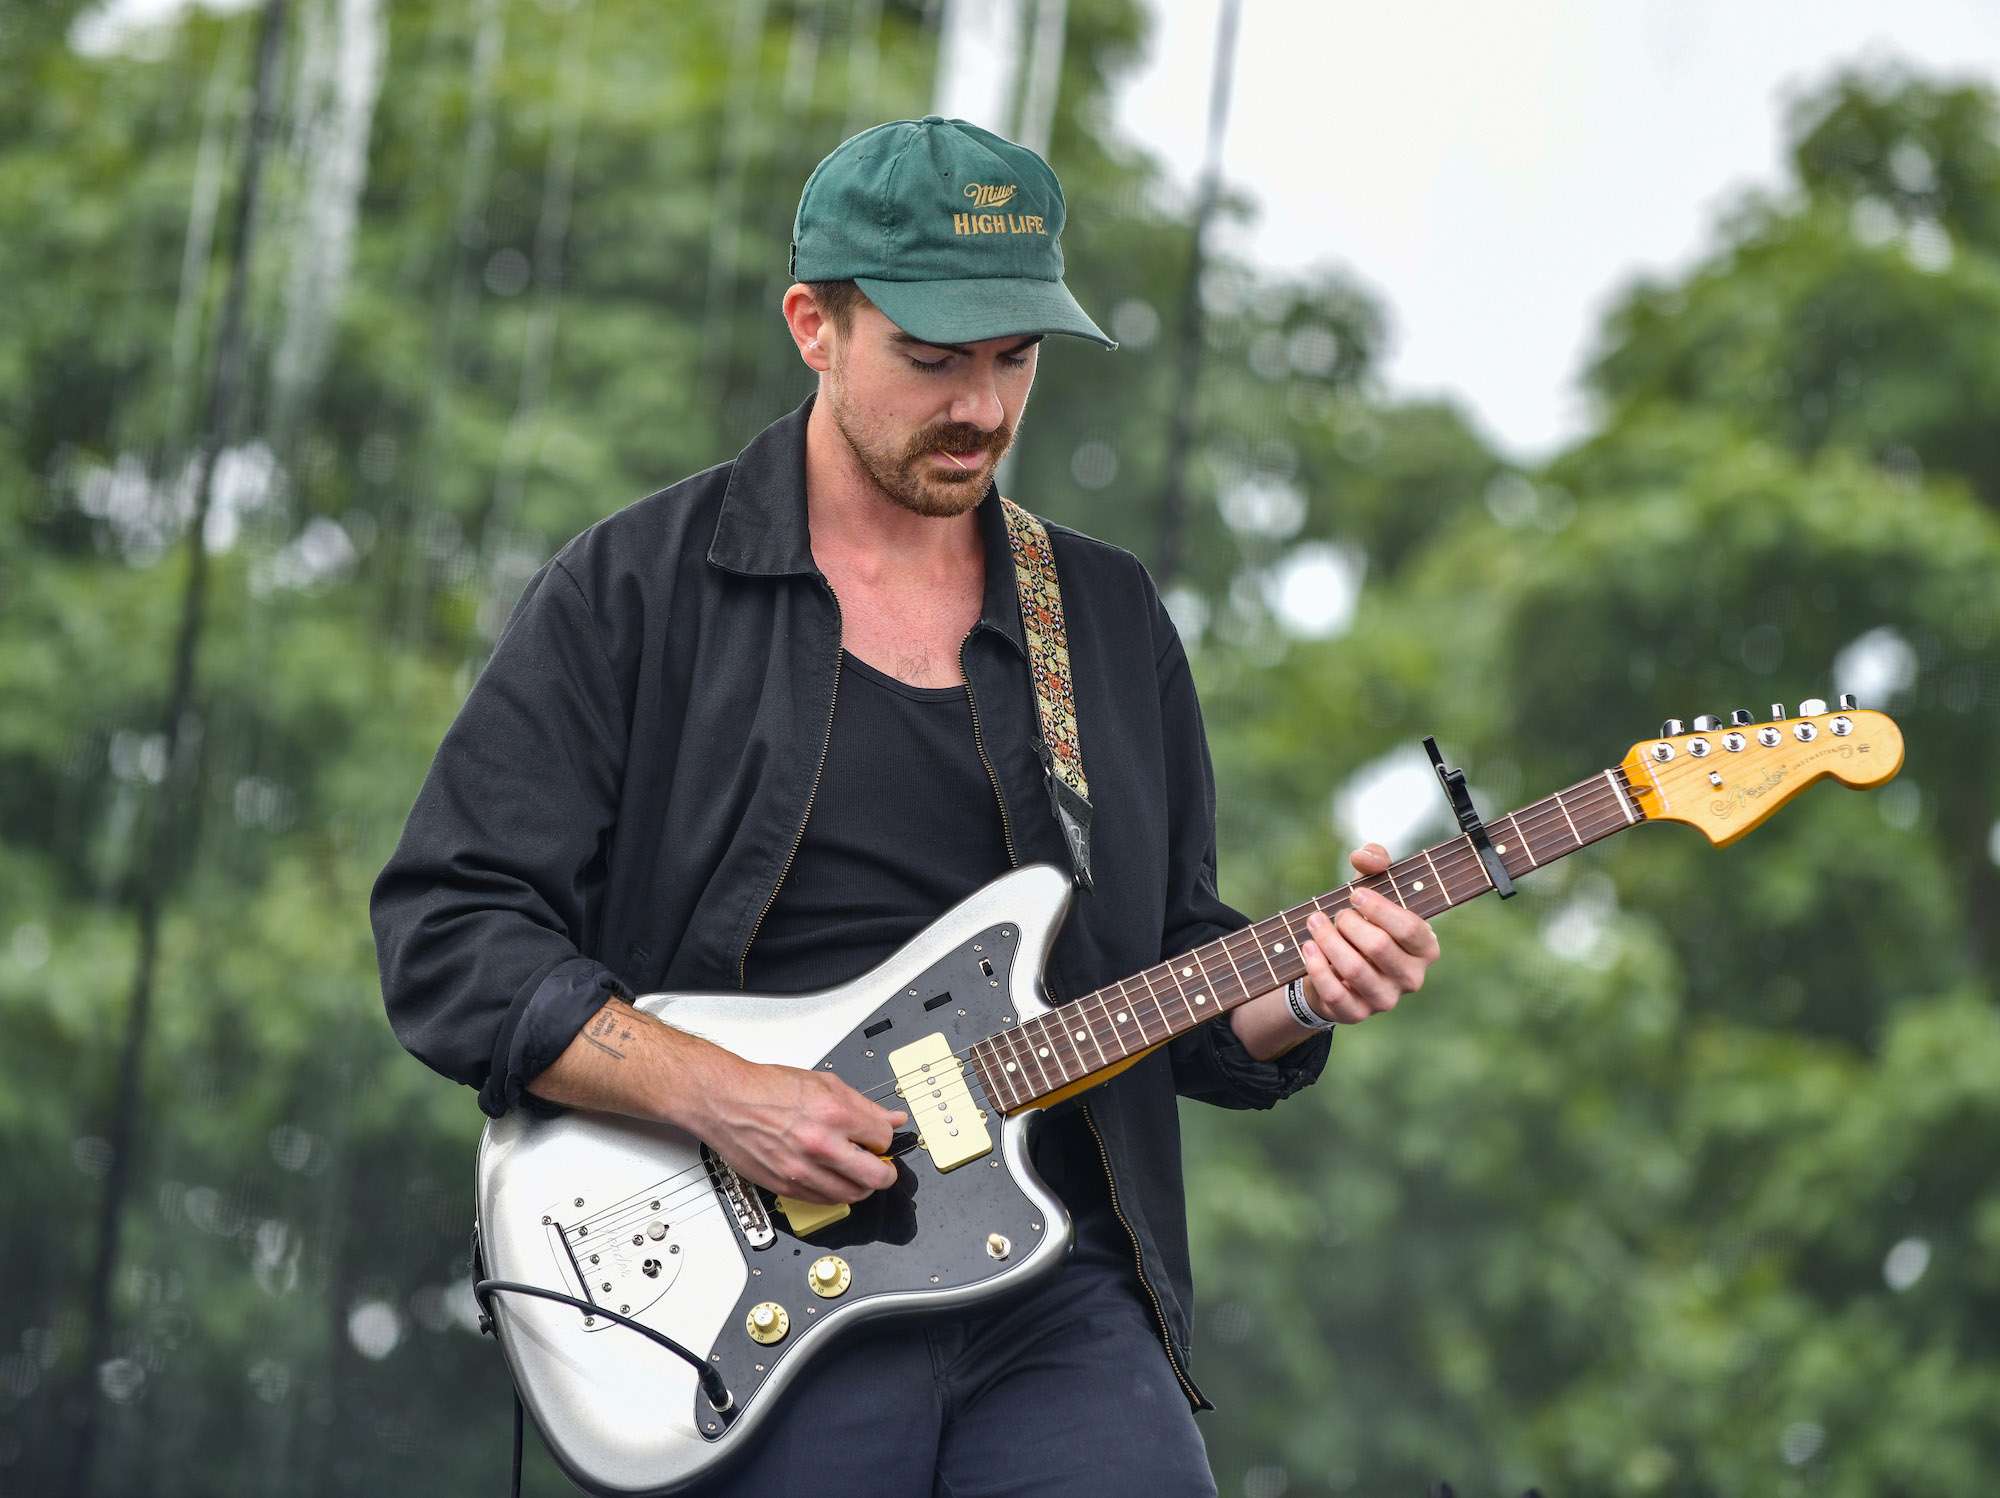 Ethel Cain Live At Pitchfork [GALLERY] 2